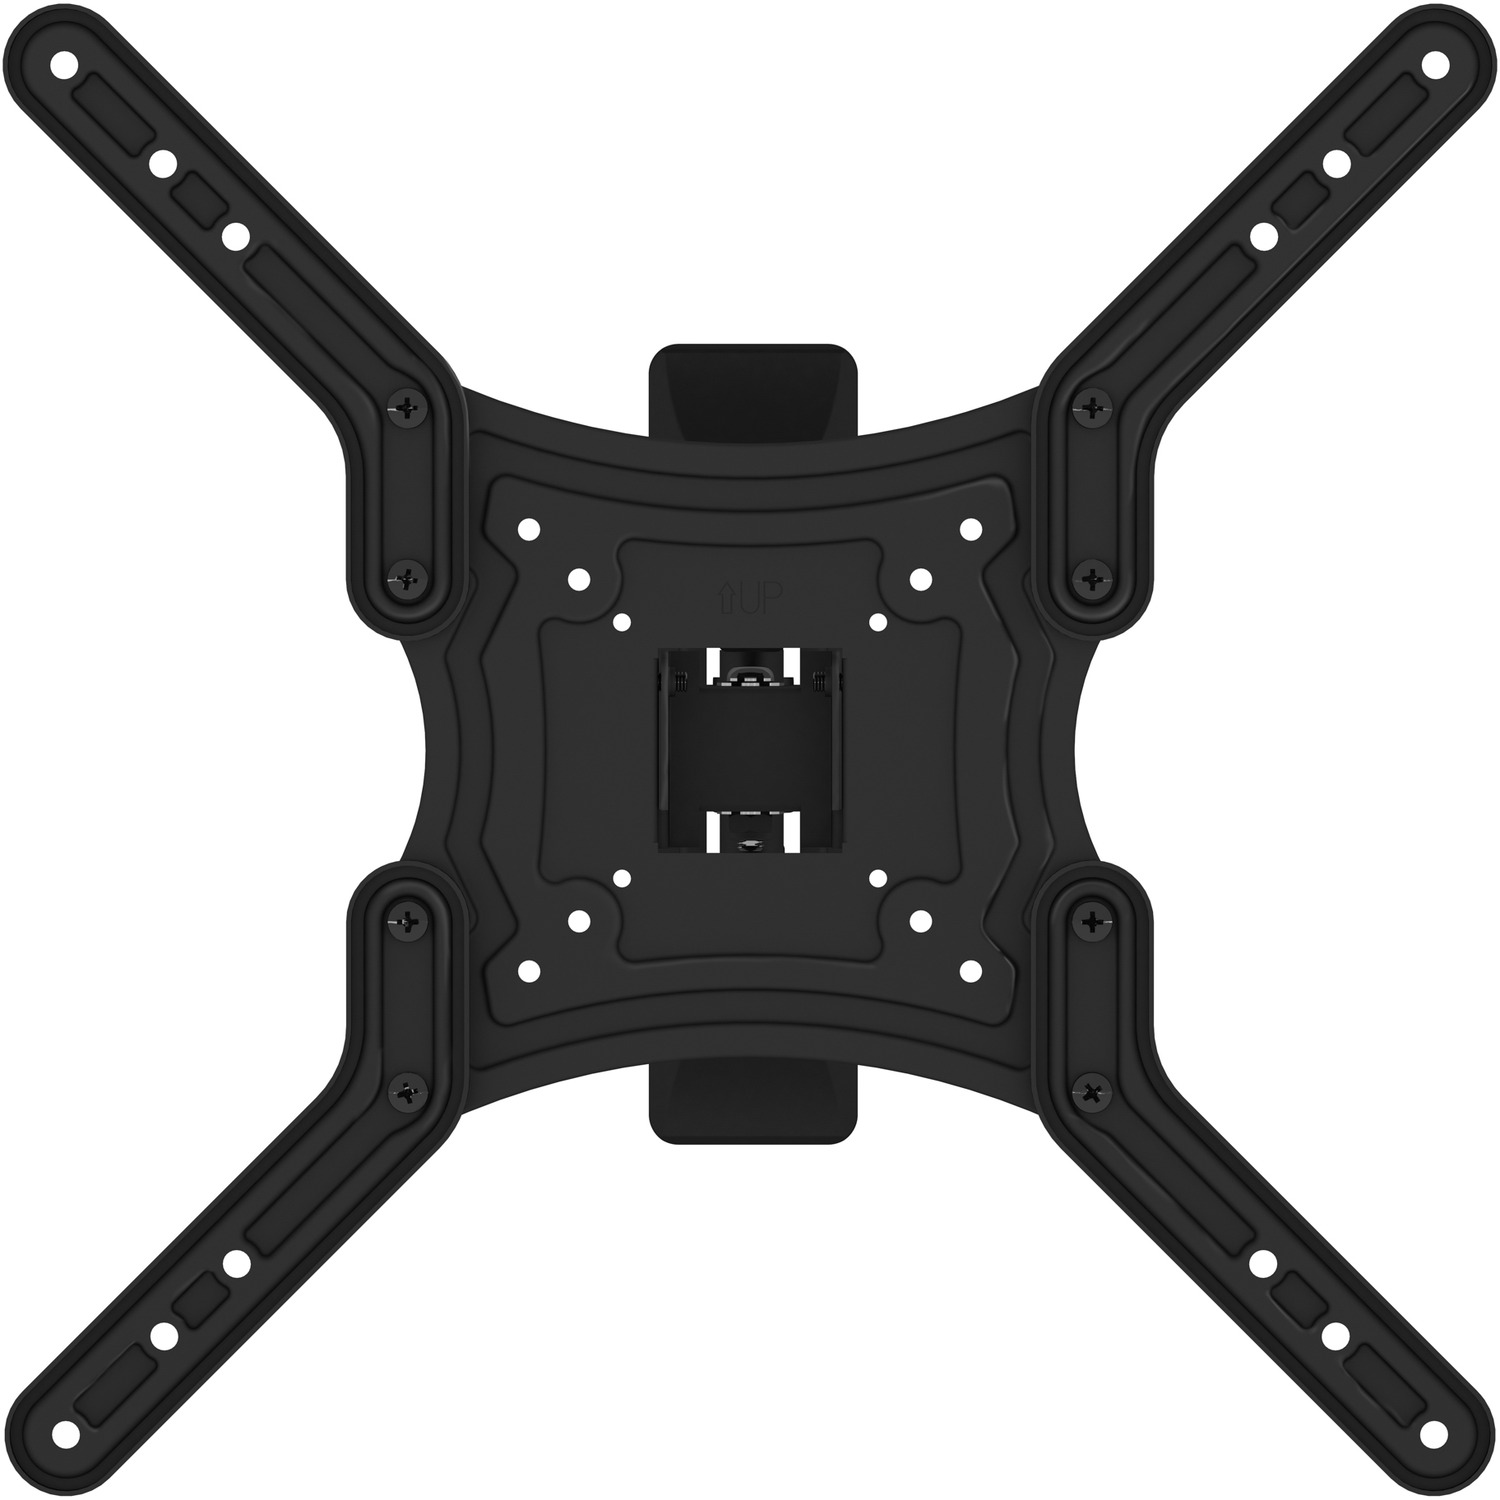 Jet Black 26 to 55 inch Multi Position TV Wall Mount Image 2